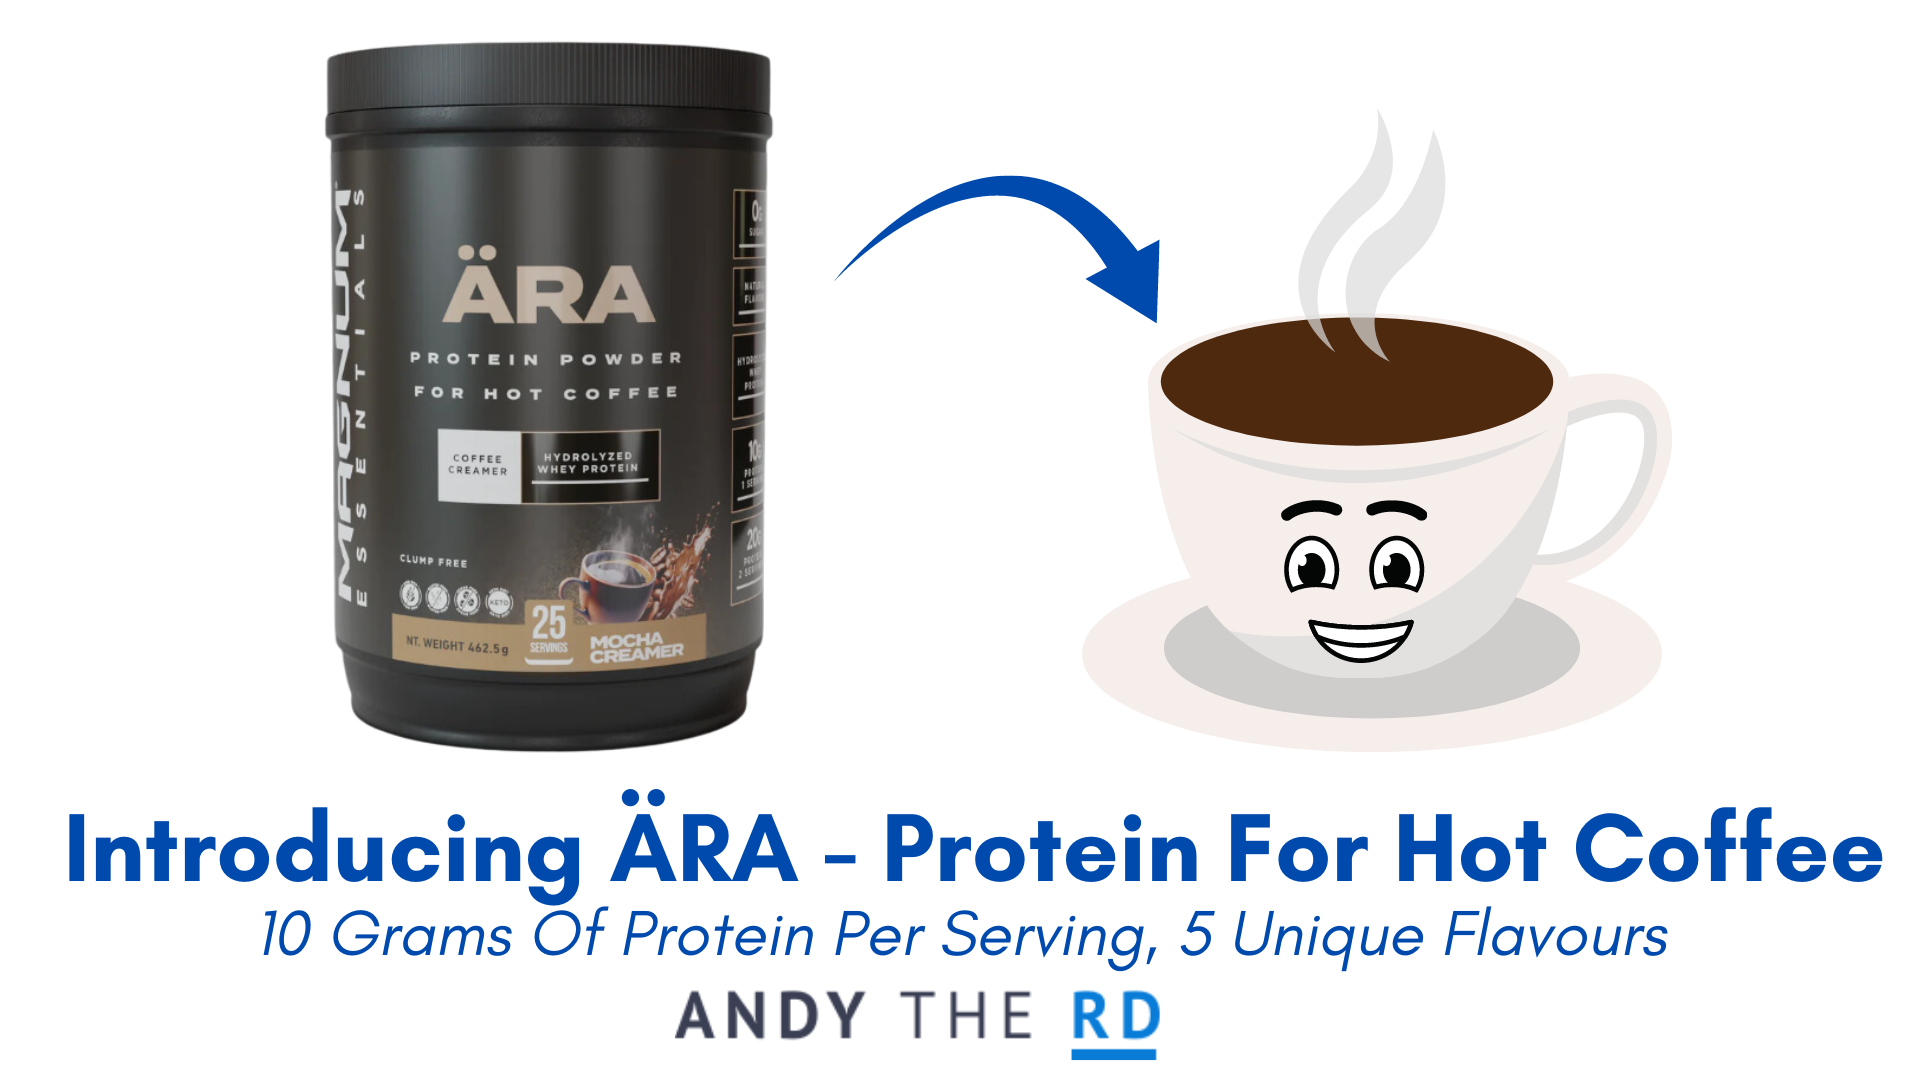 Introducing ÄRA – Protein Powder For Hot Coffee